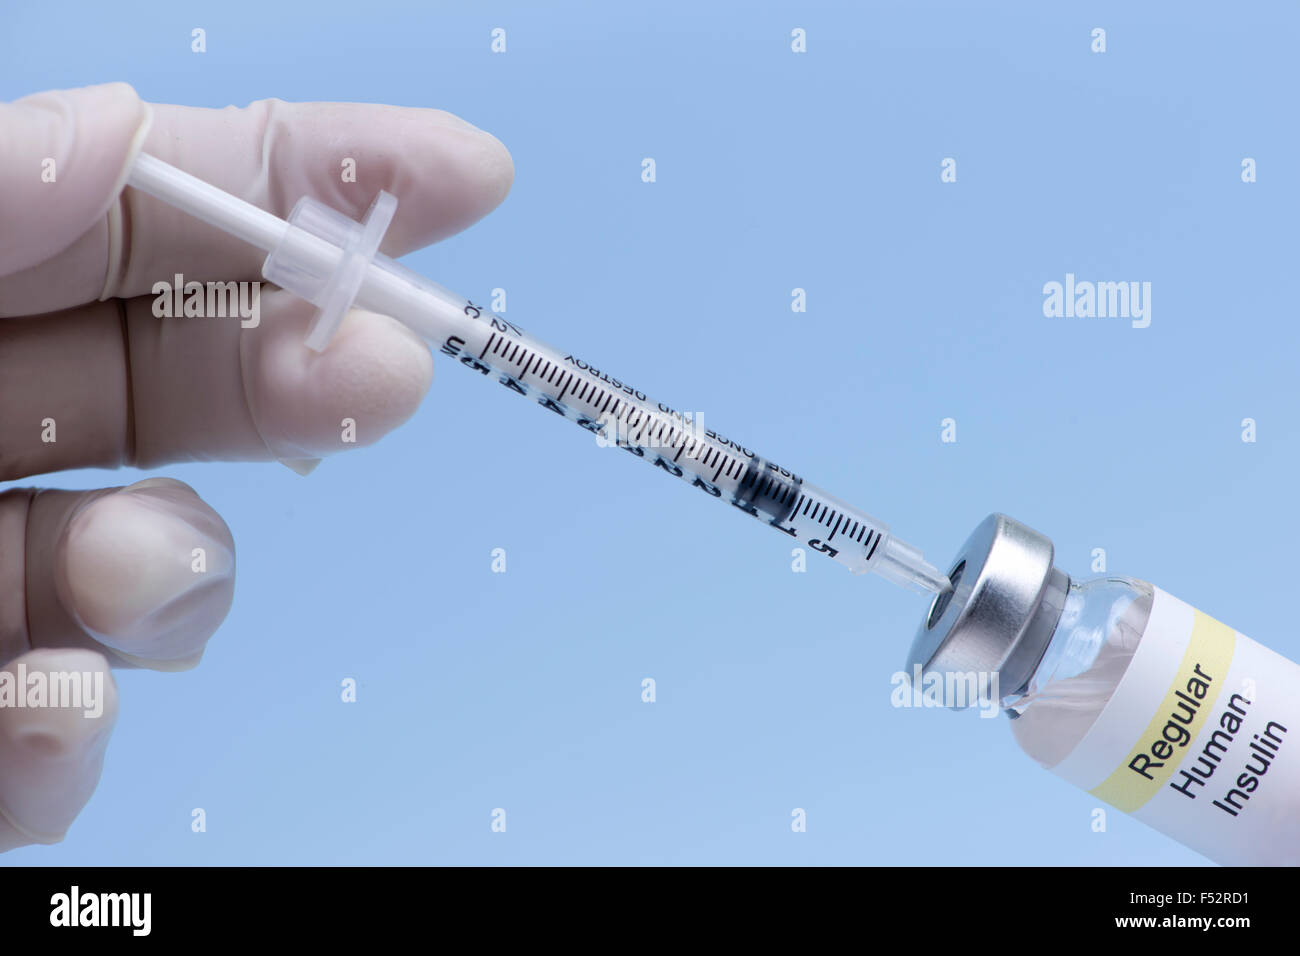 Nurse injects air into regular insulin vial prior to drawing medication. Stock Photo